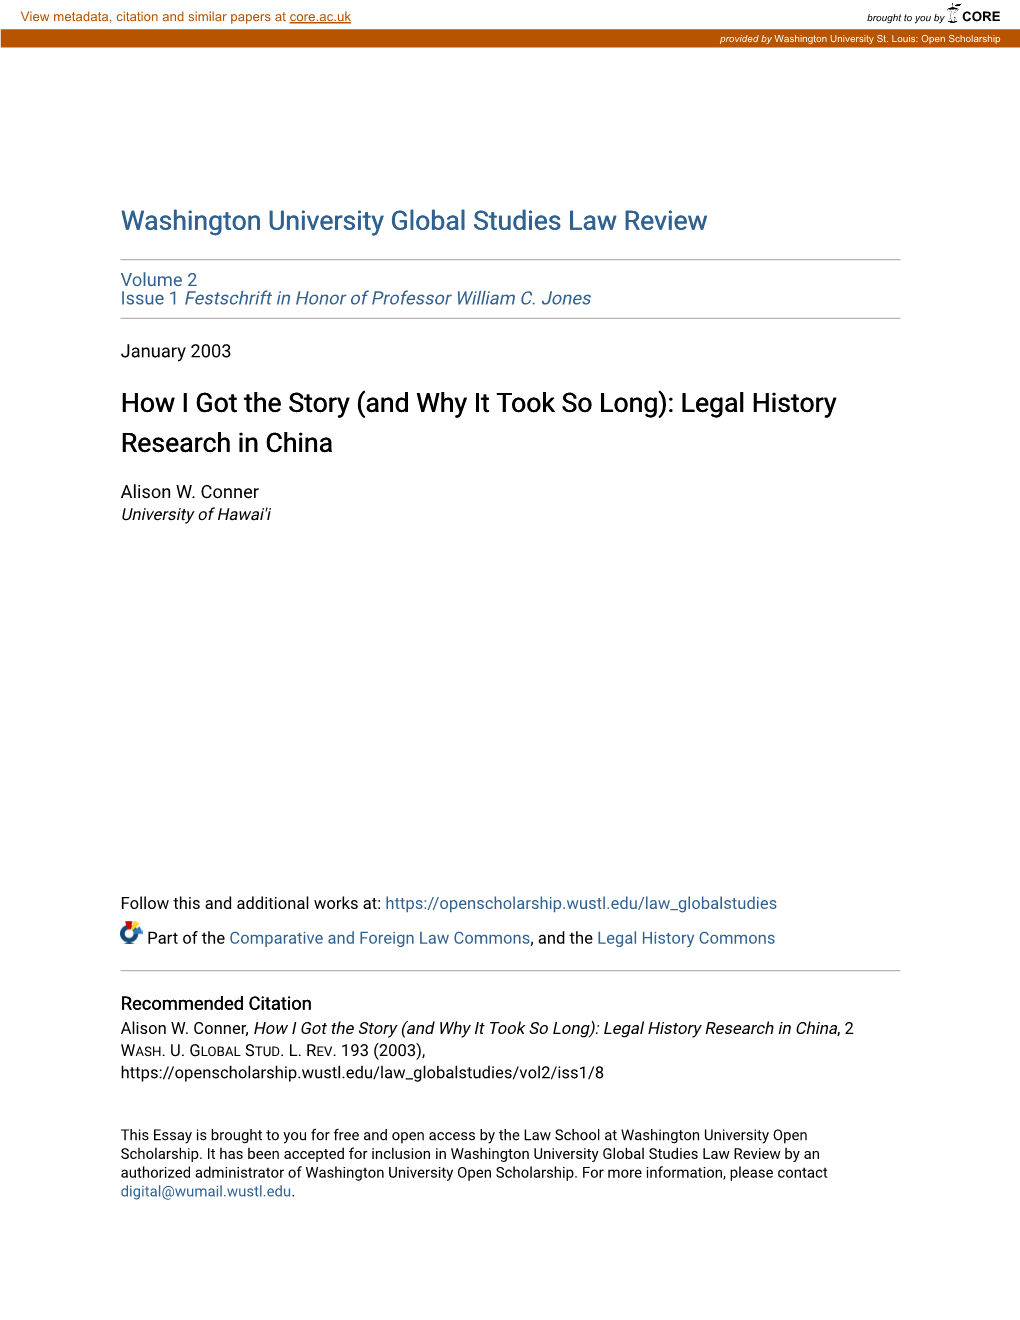 How I Got the Story (And Why It Took So Long): Legal History Research in China